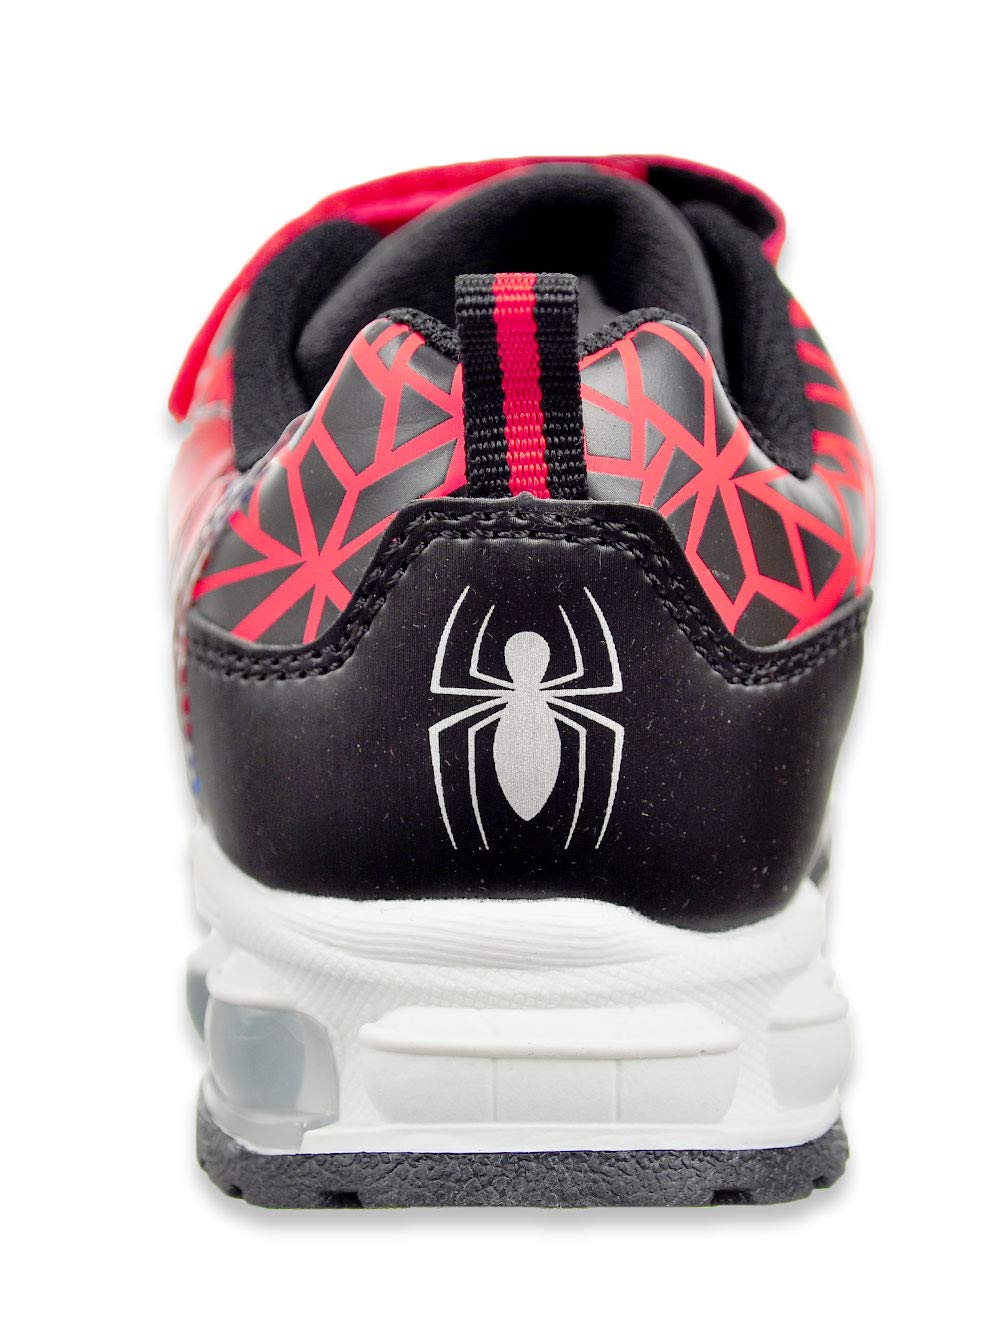 Favorite Characters Boys Marvel Spider-Man Lighted Athletic Sneaker, Red, Toddler, Size 7